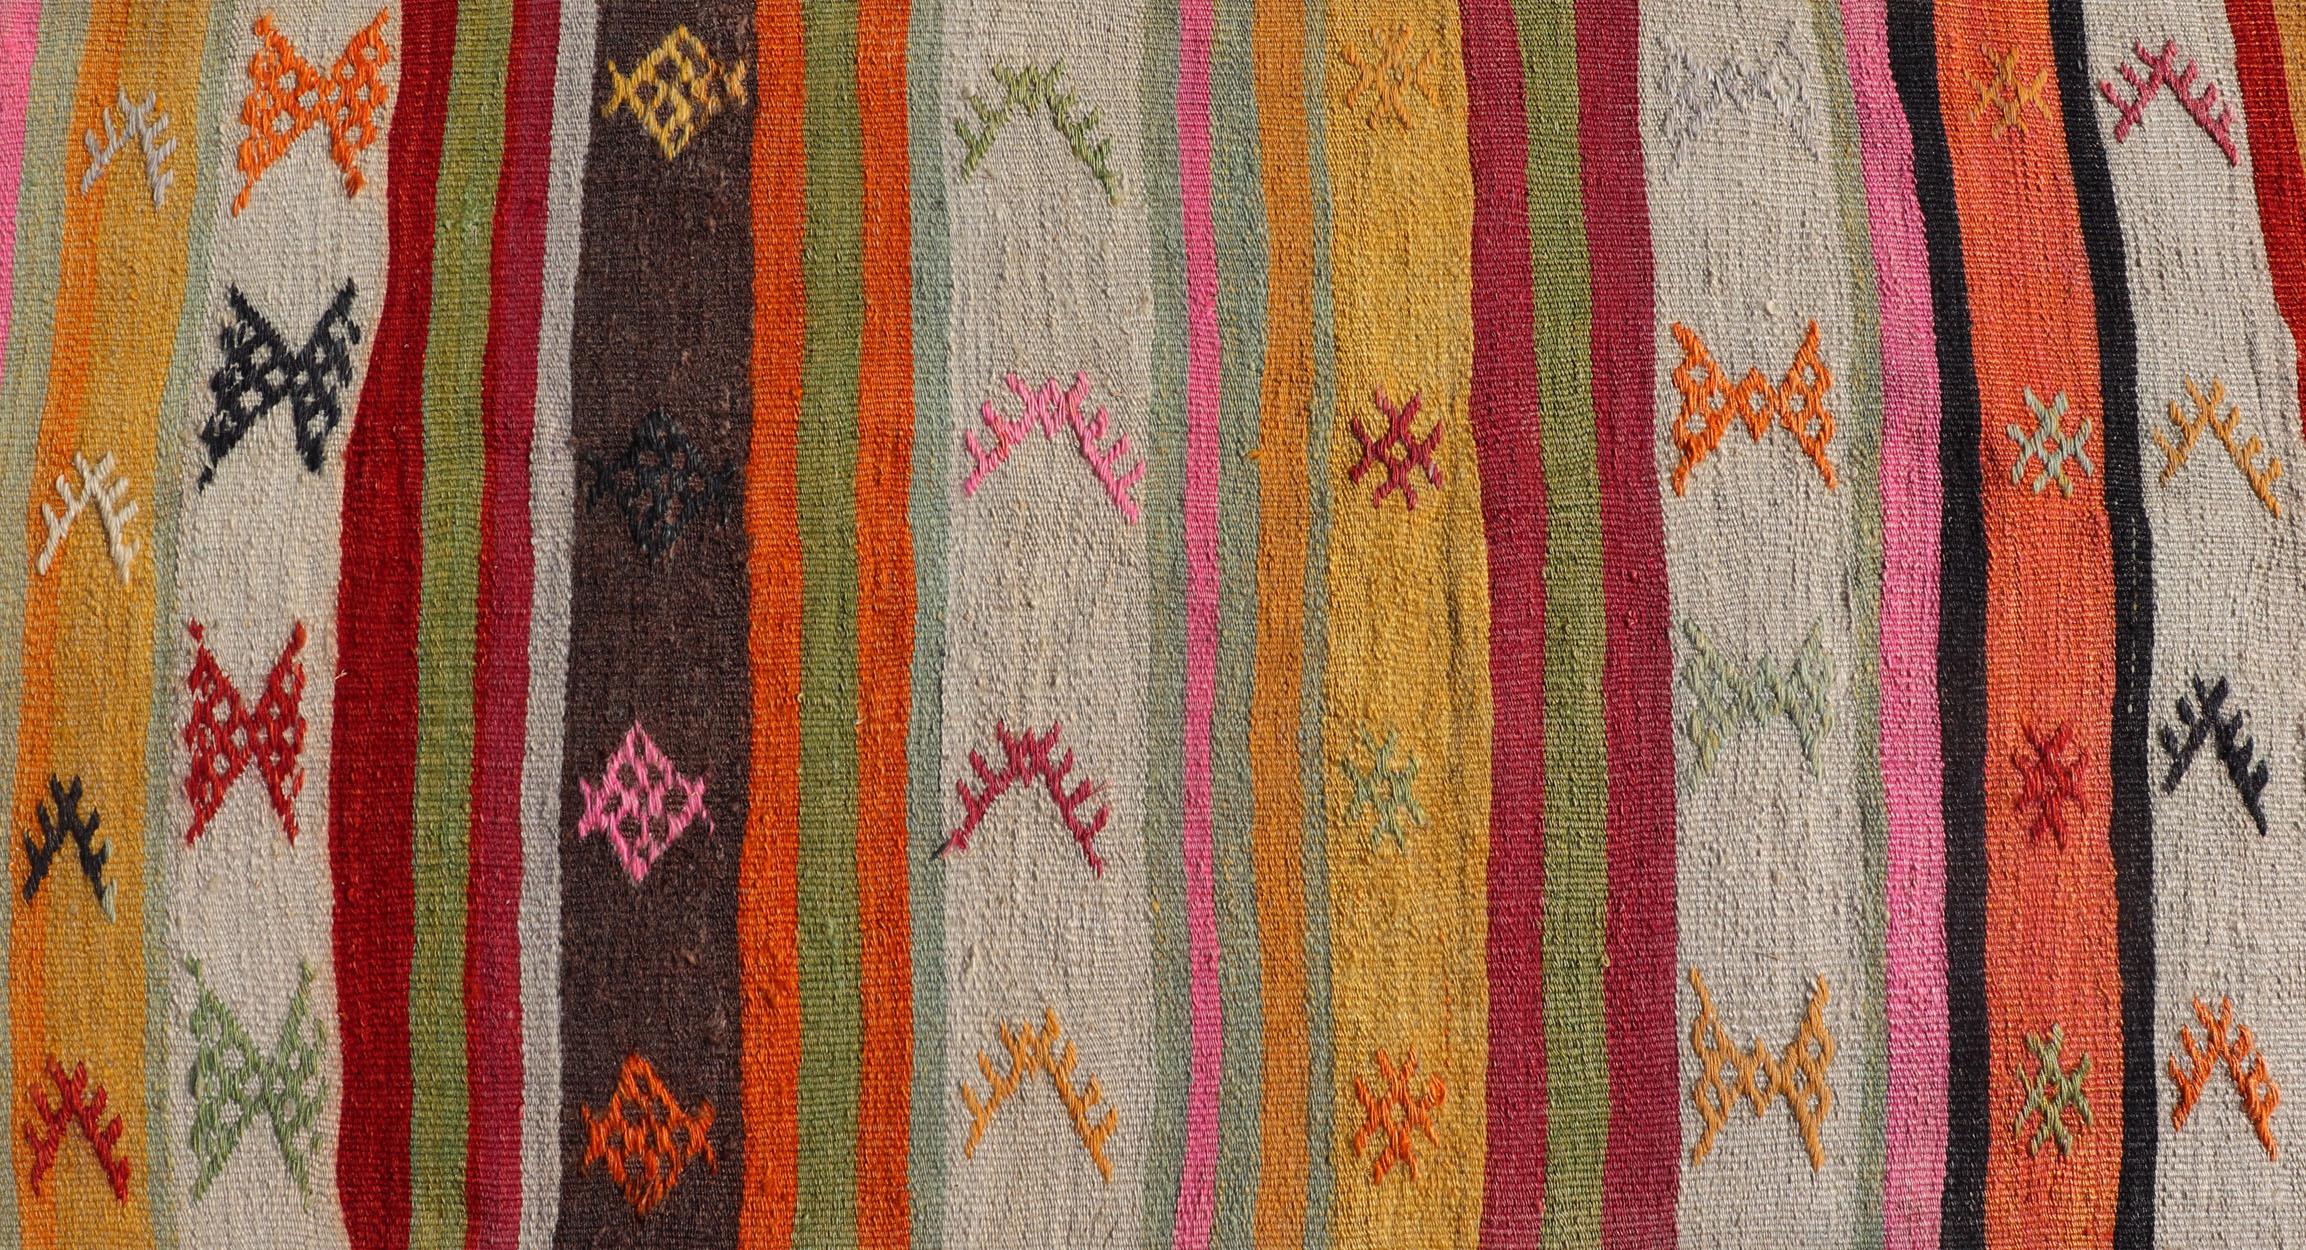 Vintage Hand Woven Turkish Kilim Colorful Stripe Runner with Tribal Motifs For Sale 3